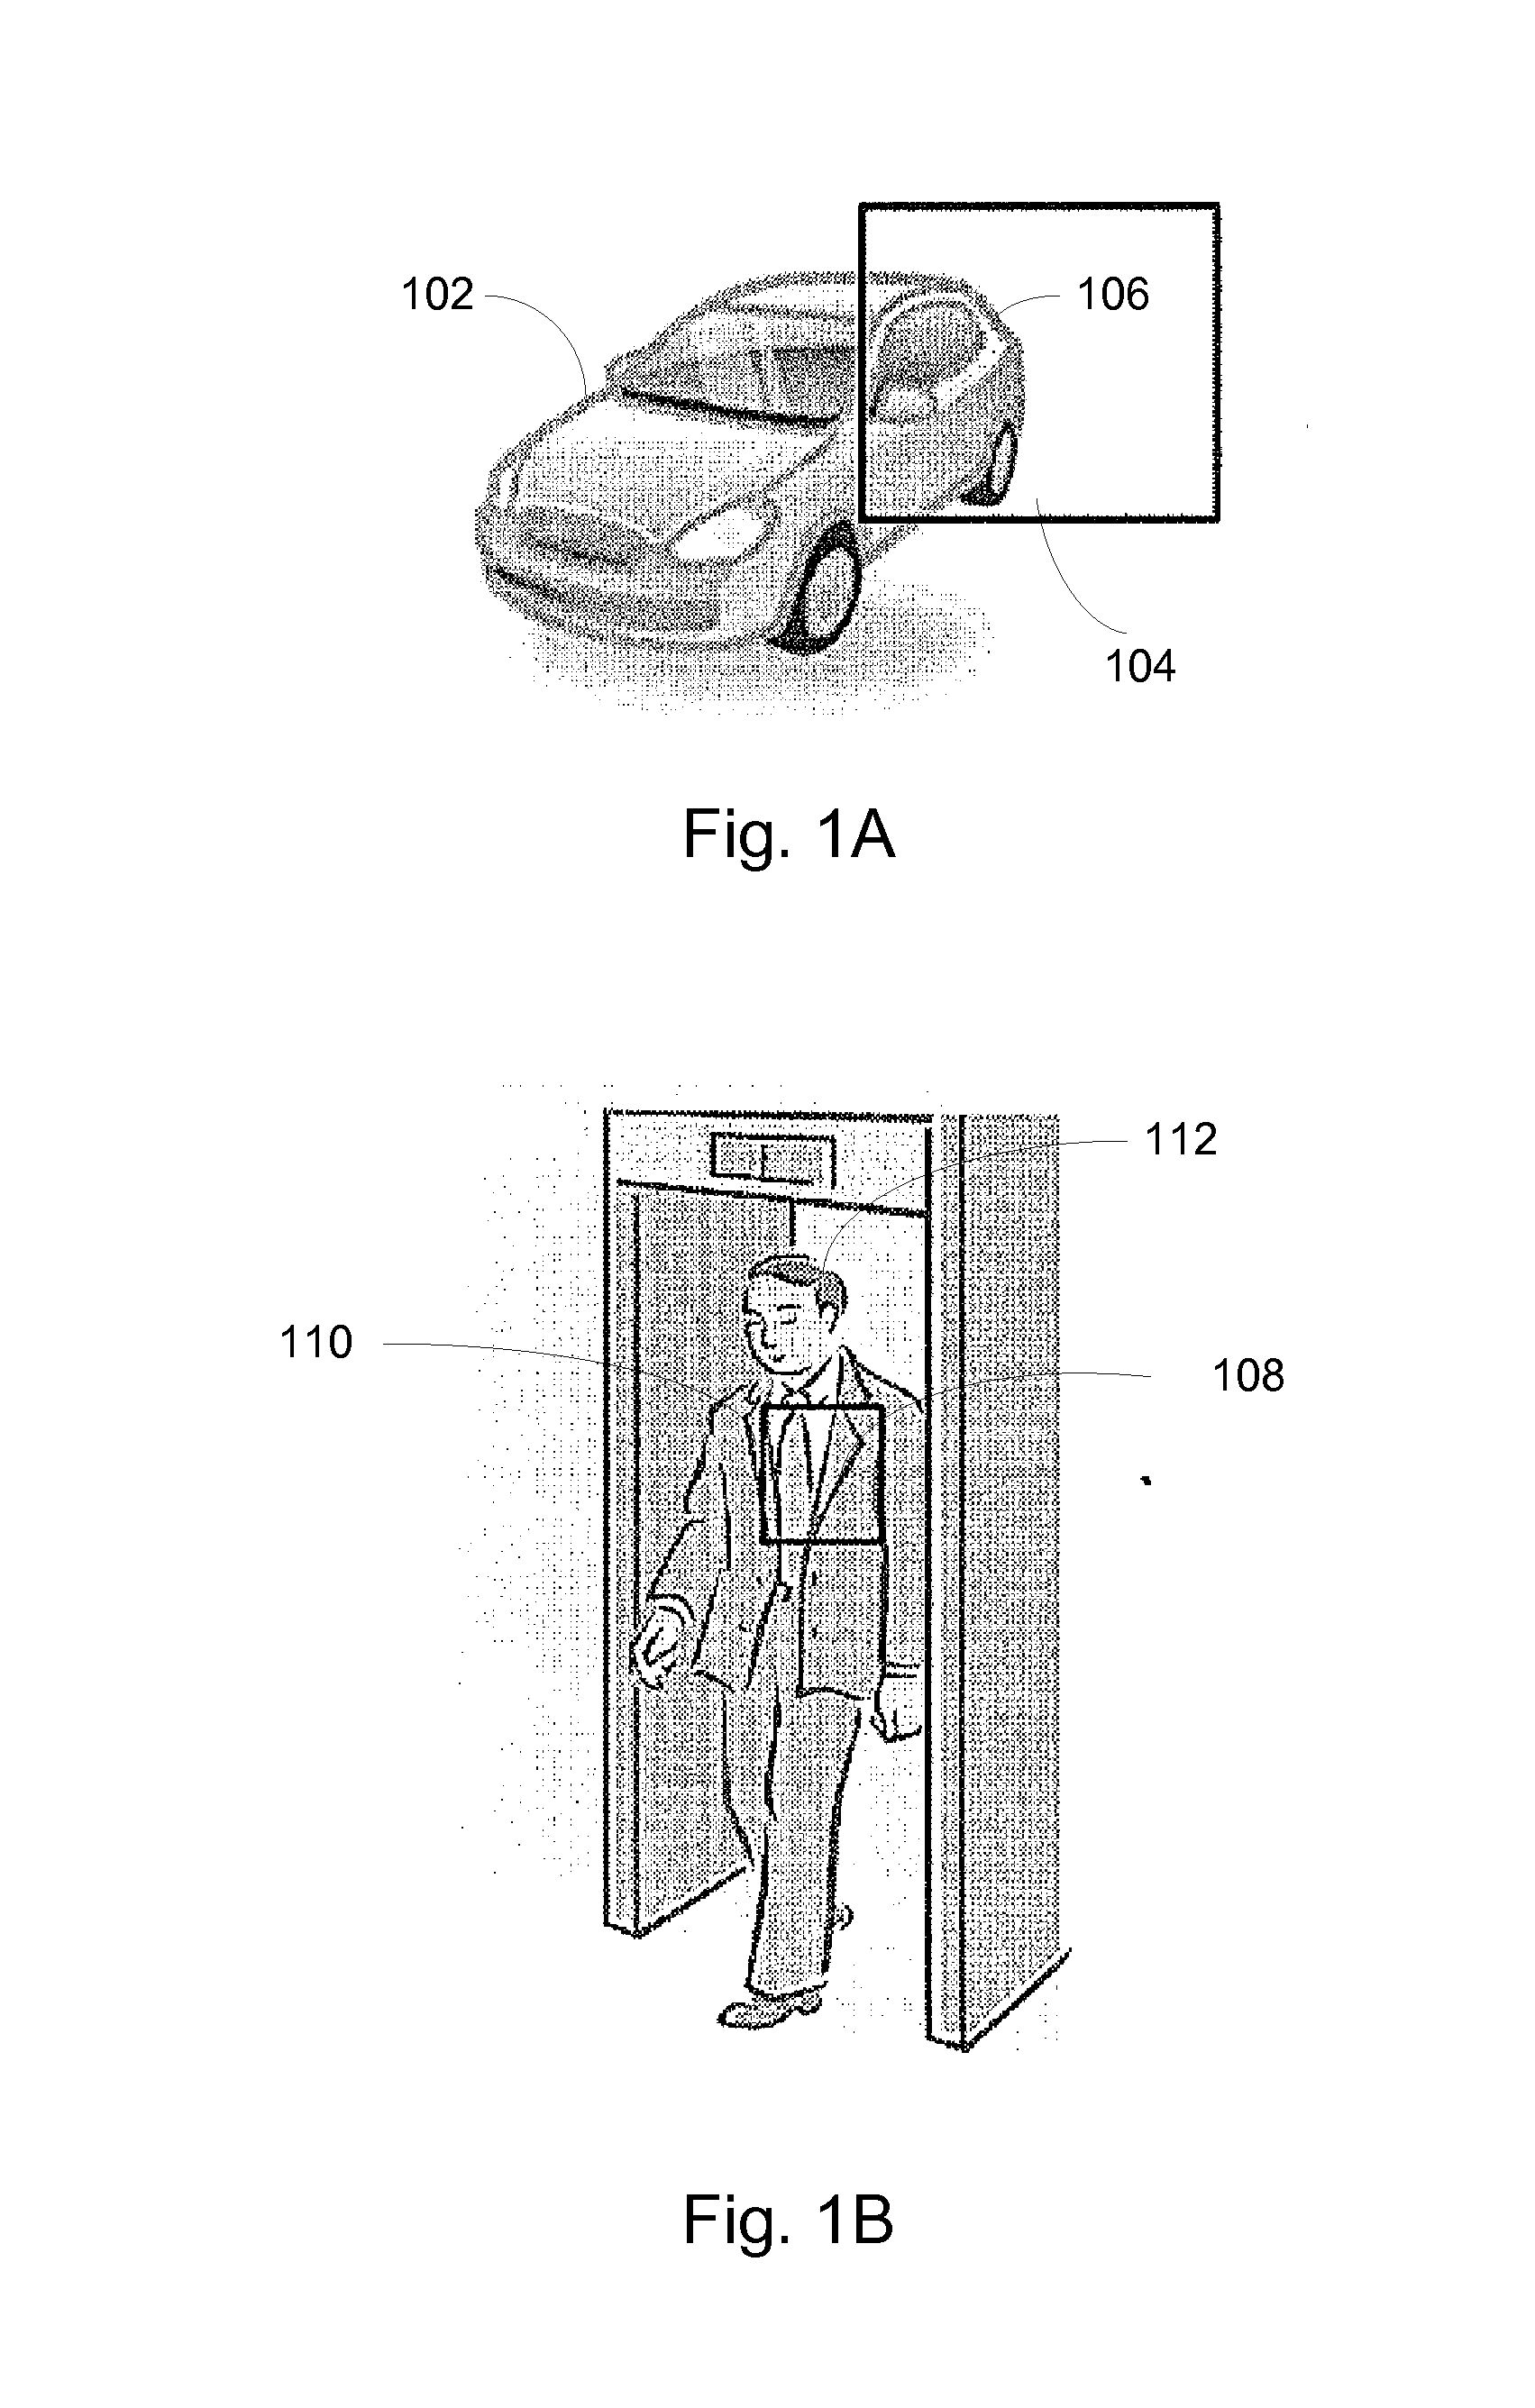 System and method for detection of a characteristic in samples of a sample set